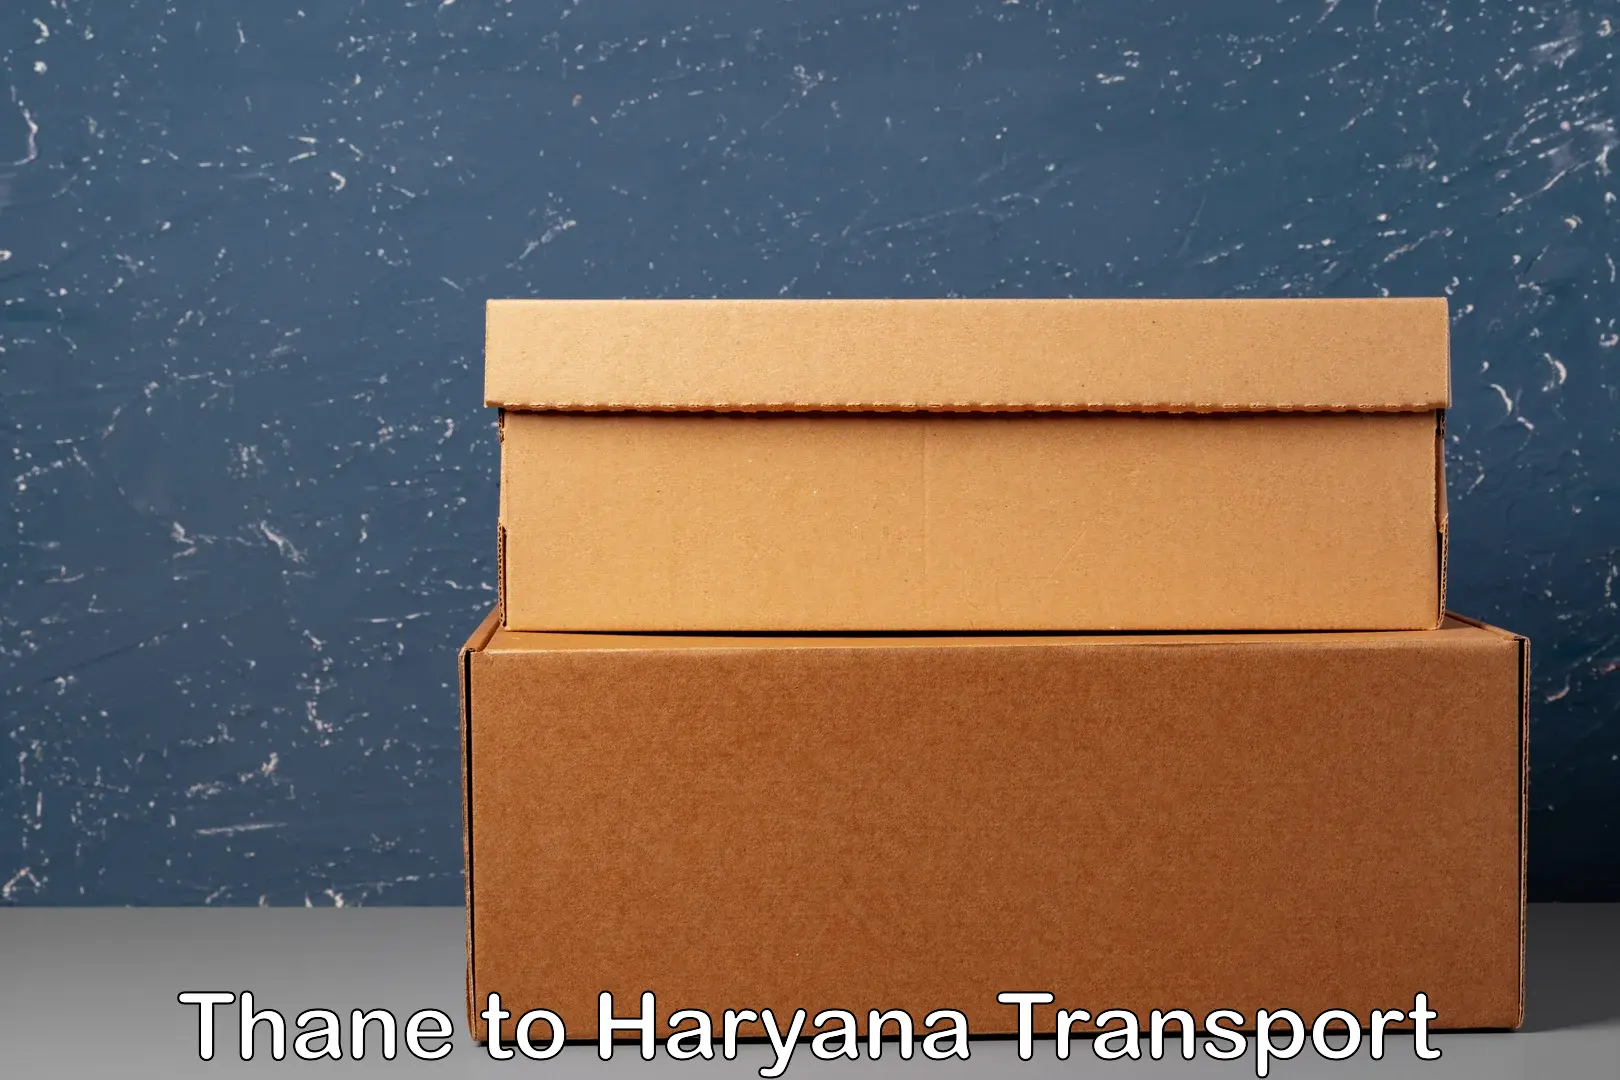 Goods delivery service Thane to Gurgaon